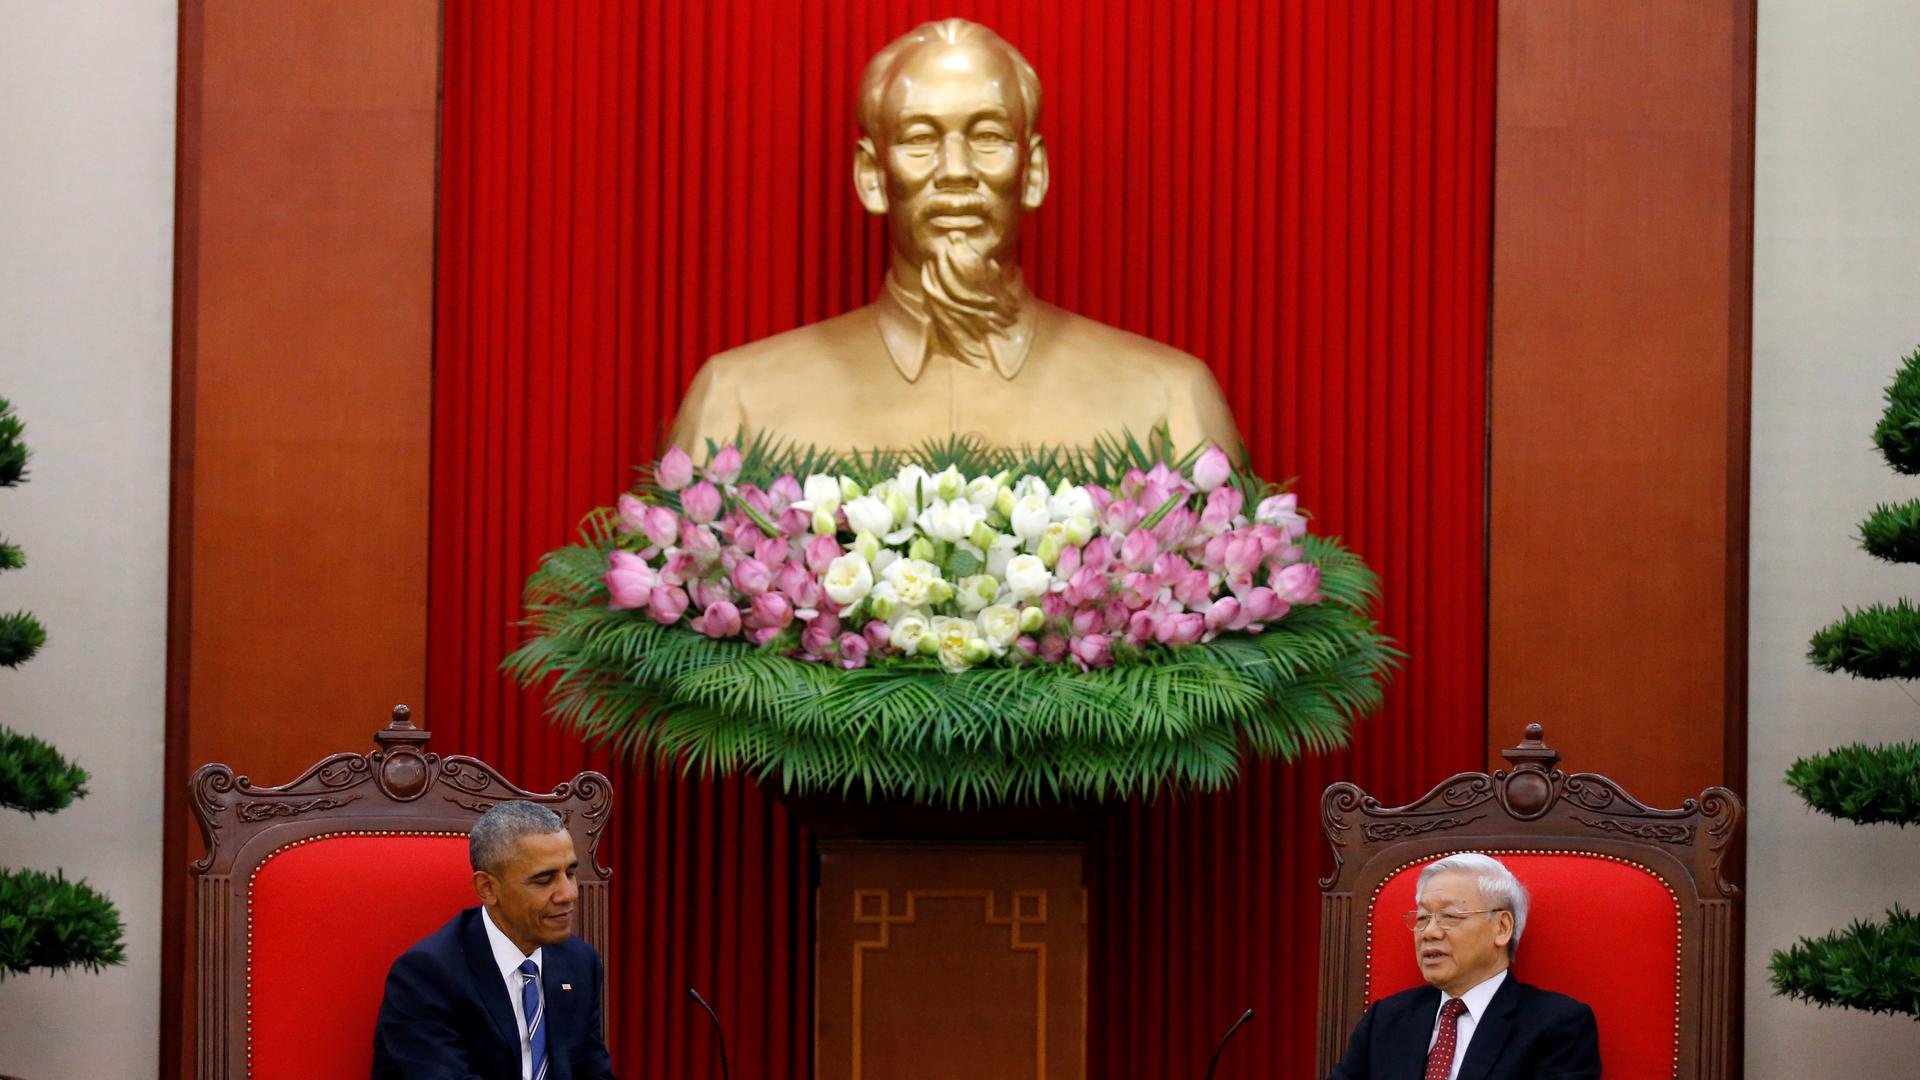 President Obama, in Hanoi, meets with Vietnam's Communist Party chief under a statue of Ho Chi Minh